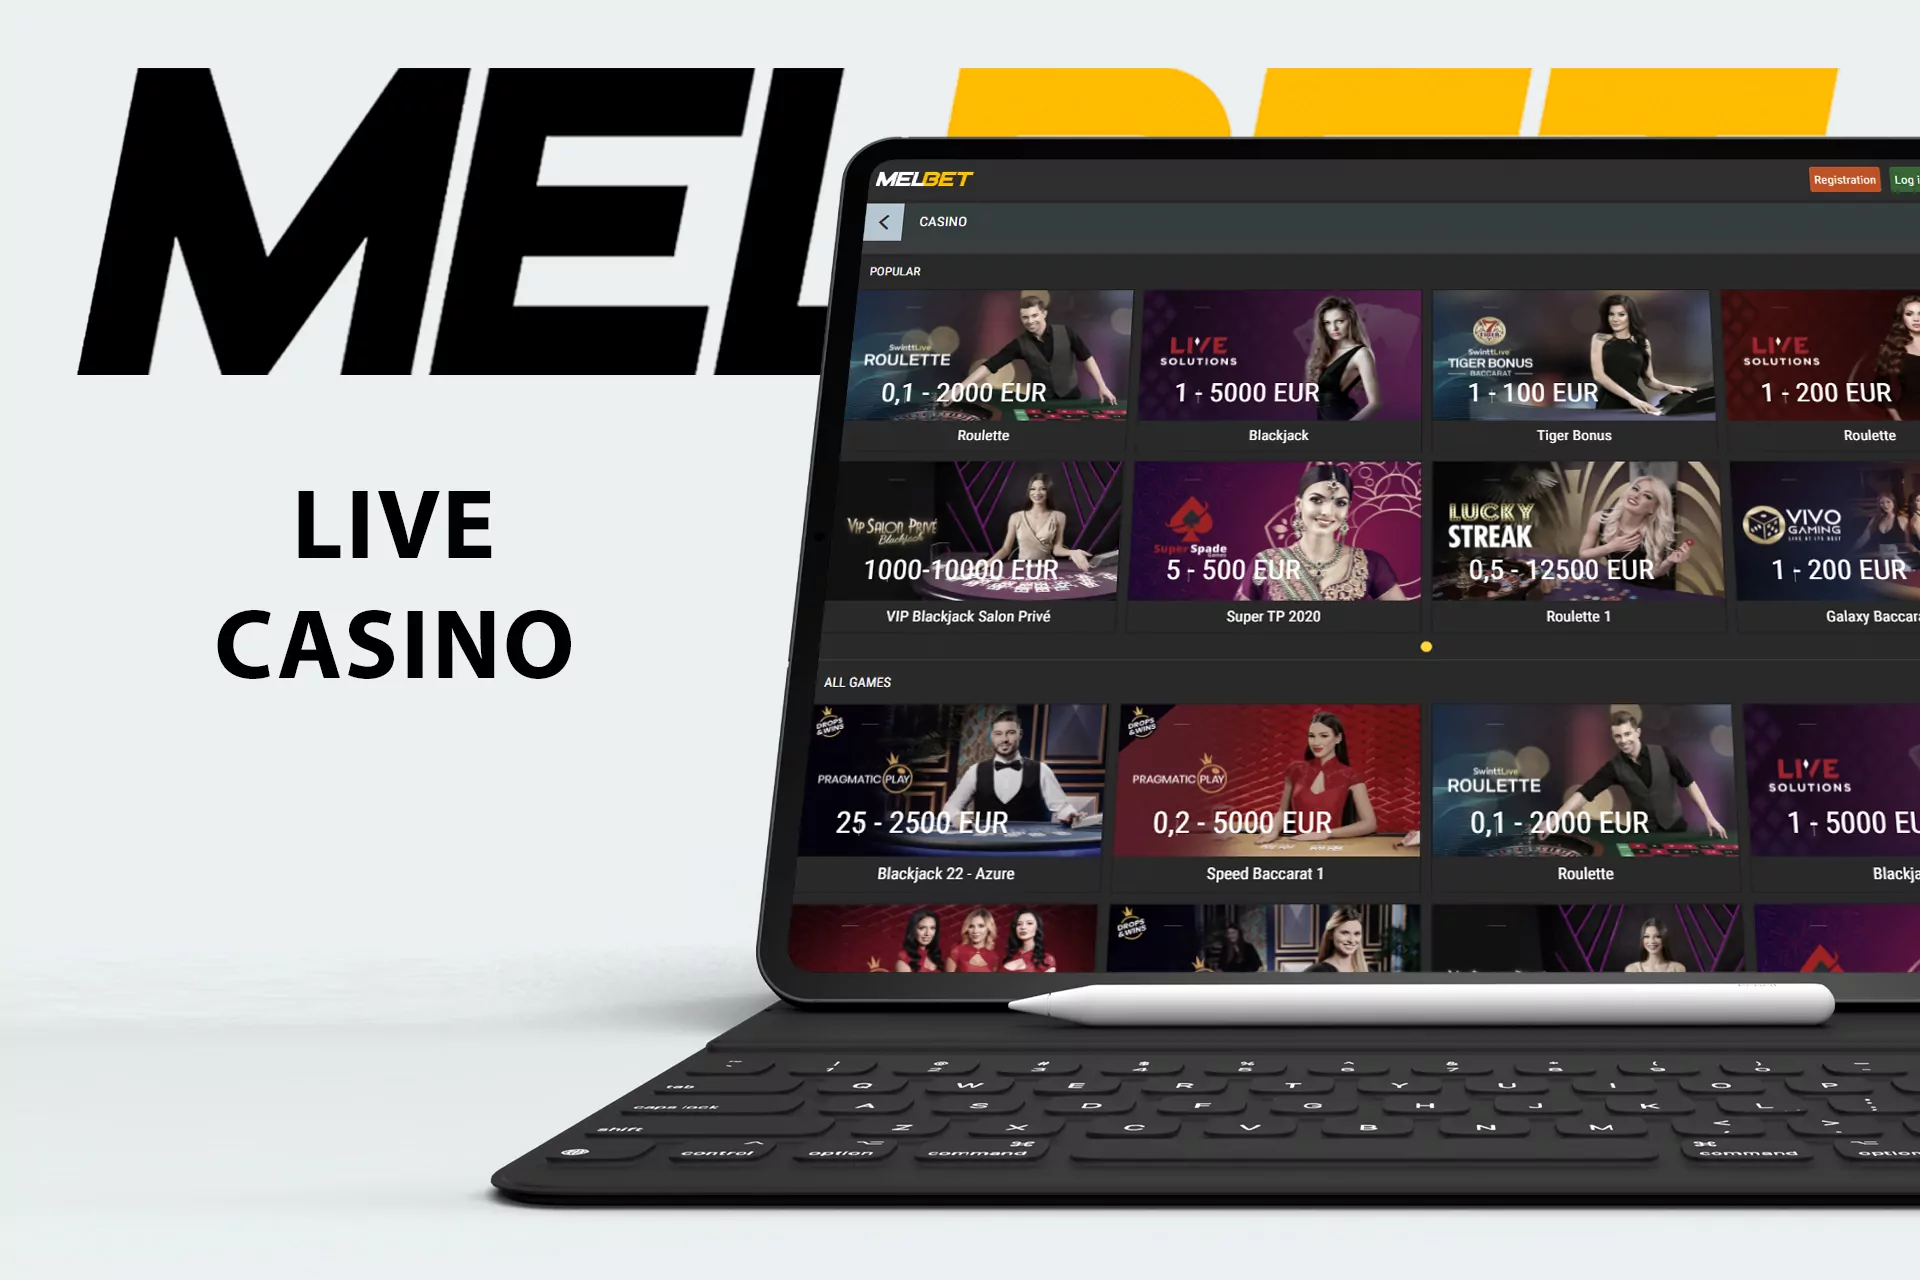 In the Live Casino, you can play online with real dealers.